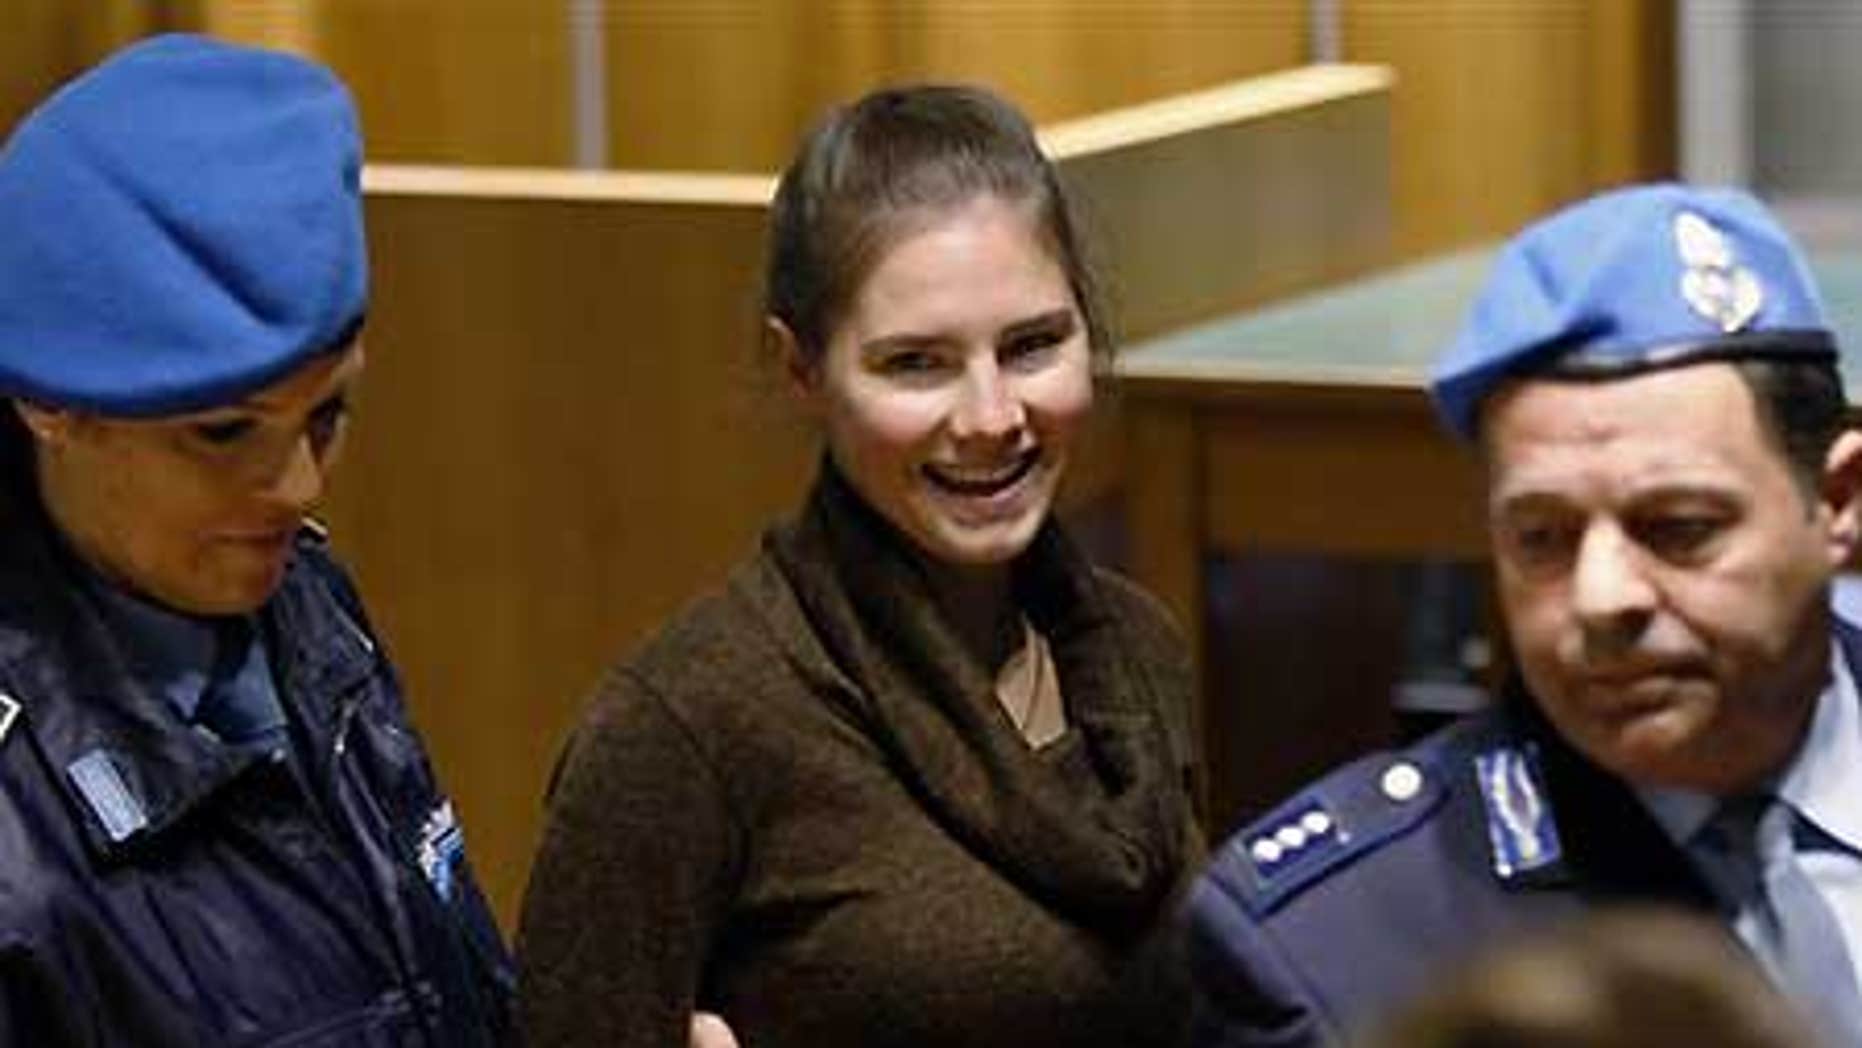 'Upset' Amanda Knox Gets Visit From Family After Verdict | Fox News